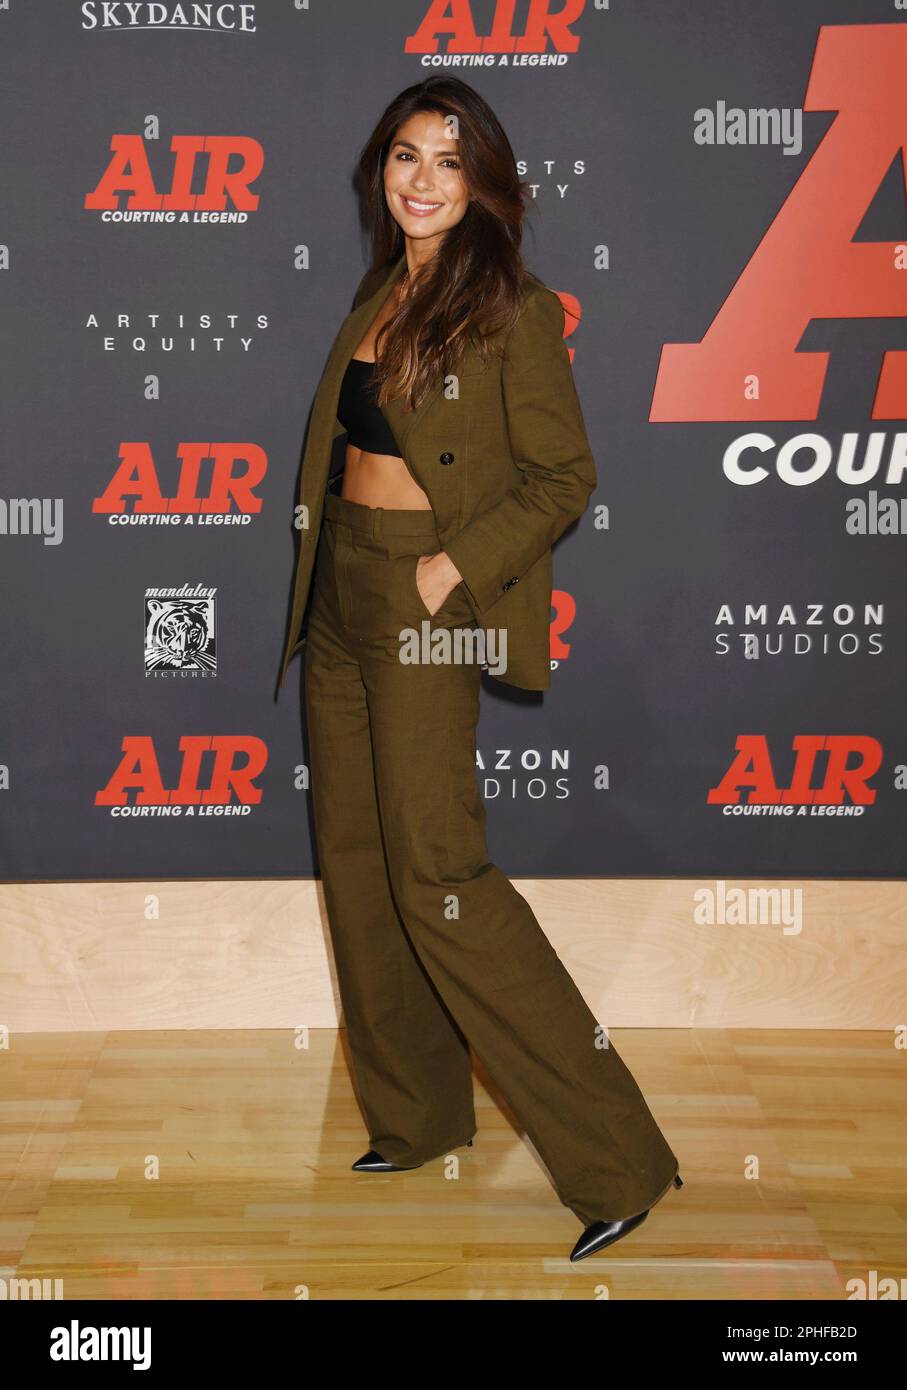 Los Angeles, California, USA. 27th Mar, 2023. Pia Miller Whitsell attends Amazon Studios' World Premiere Of 'AIR' at Regency Village Theatre on March 27, 2023 in Los Angeles, California. Credit: Jeffrey Mayer/Jtm Photos/Media Punch/Alamy Live News Stock Photo